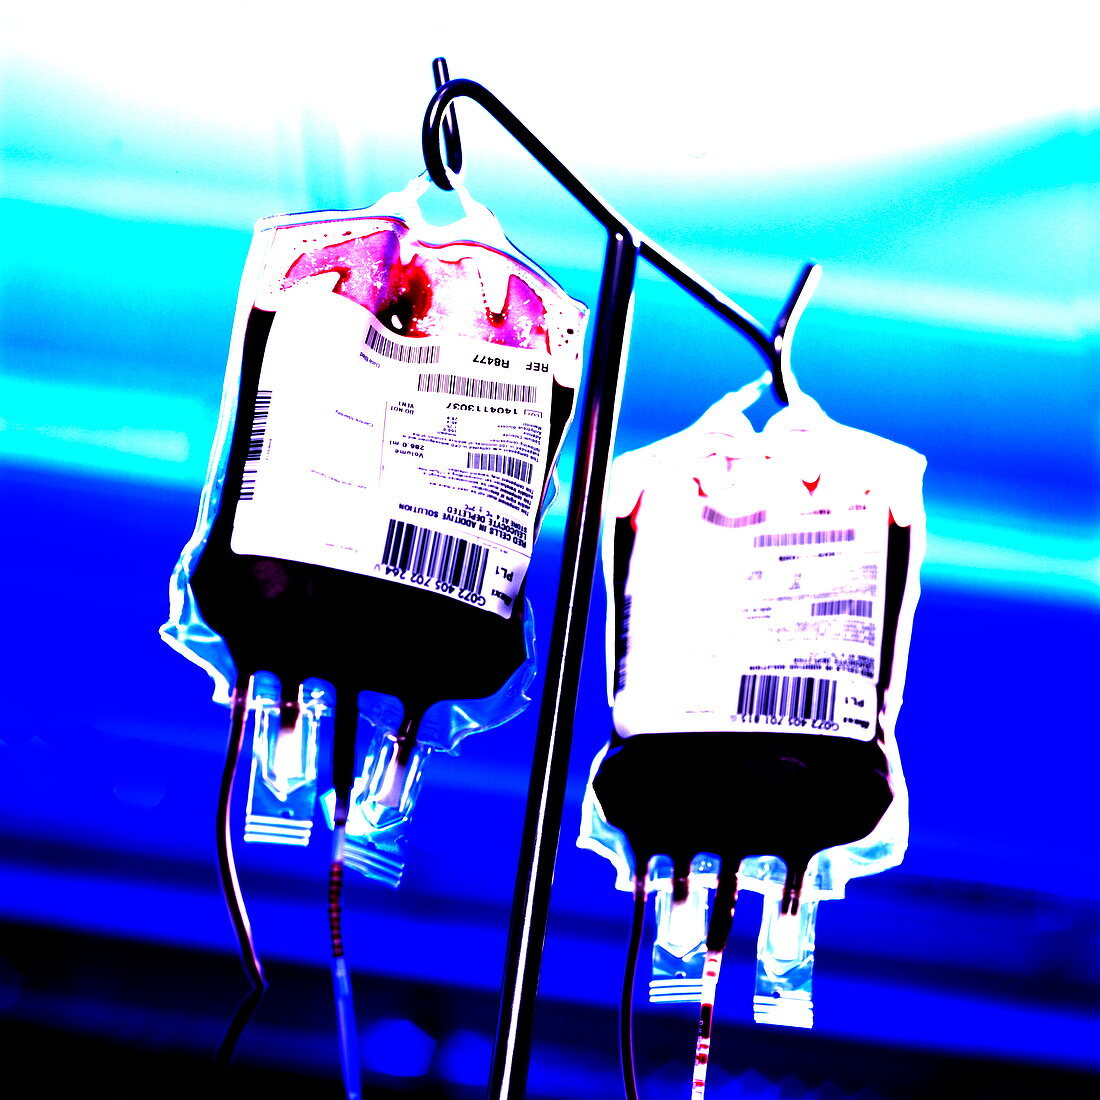 Blood bags on drip stand